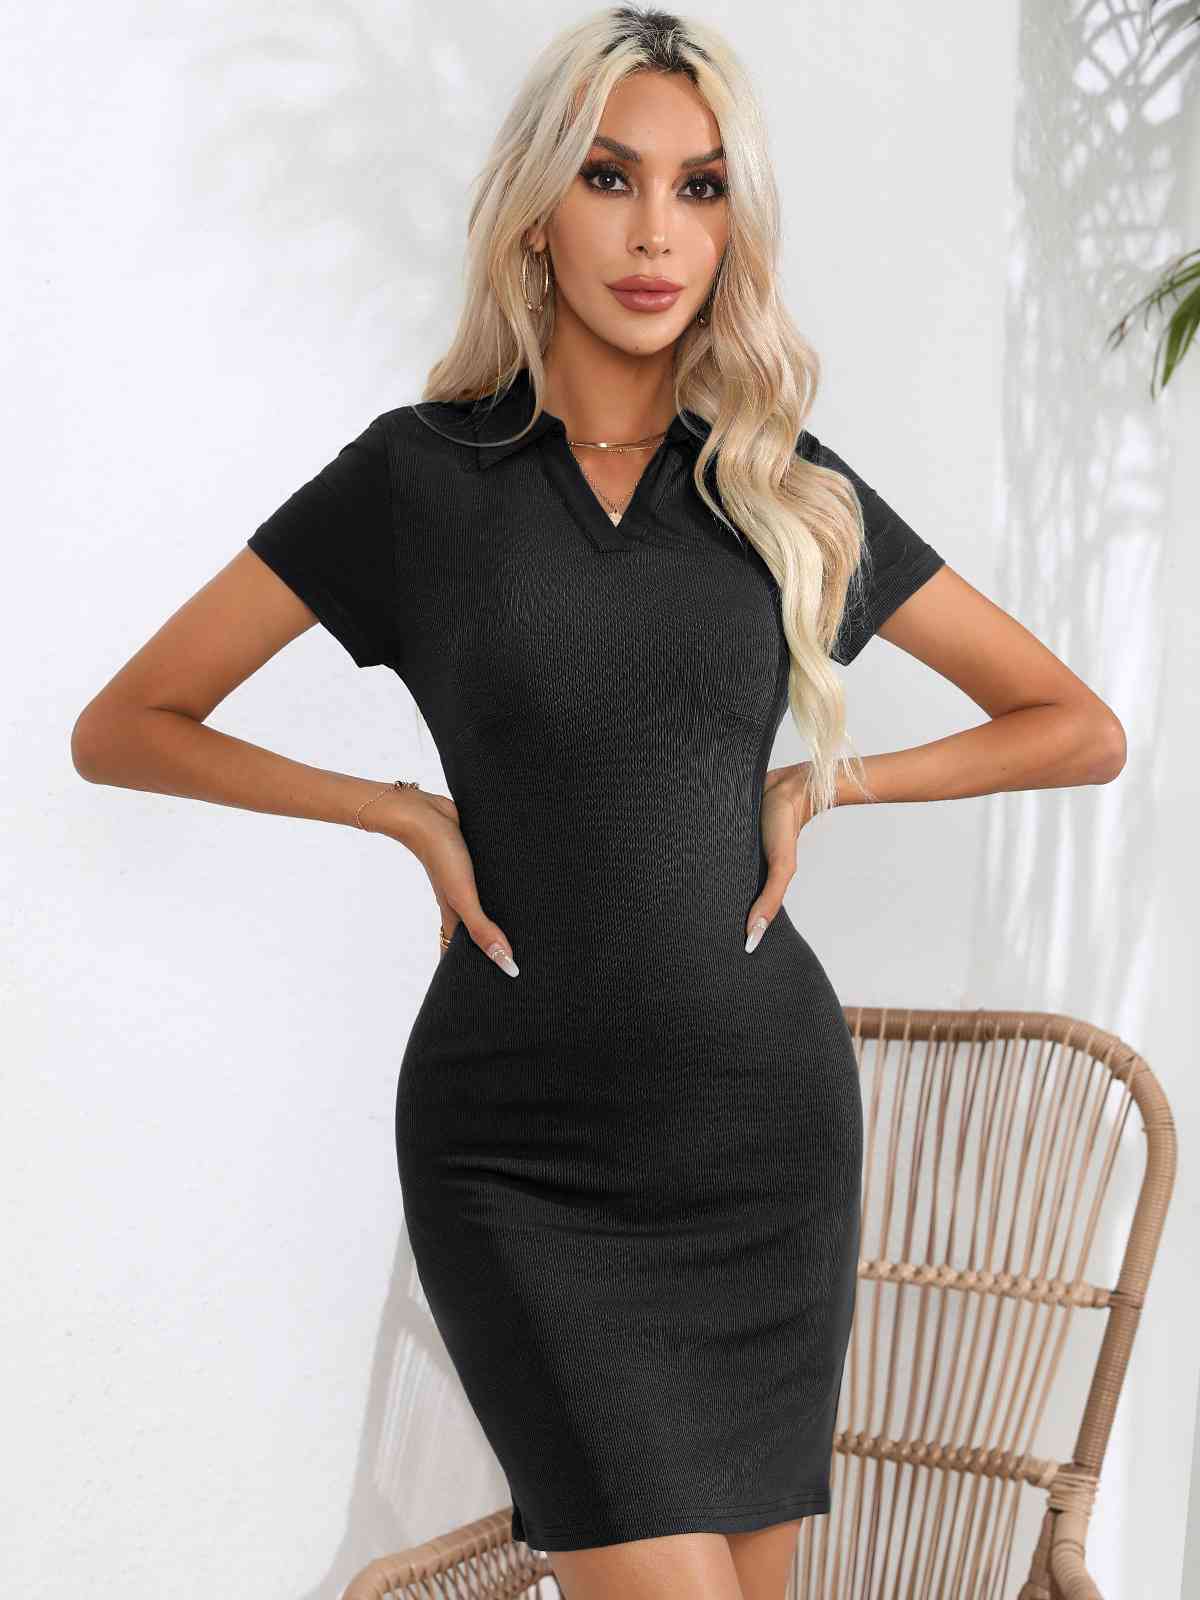 Johnny Collar Short Sleeve Bodycon Dress in 3 Color Choices in Size S, M, L, or XL